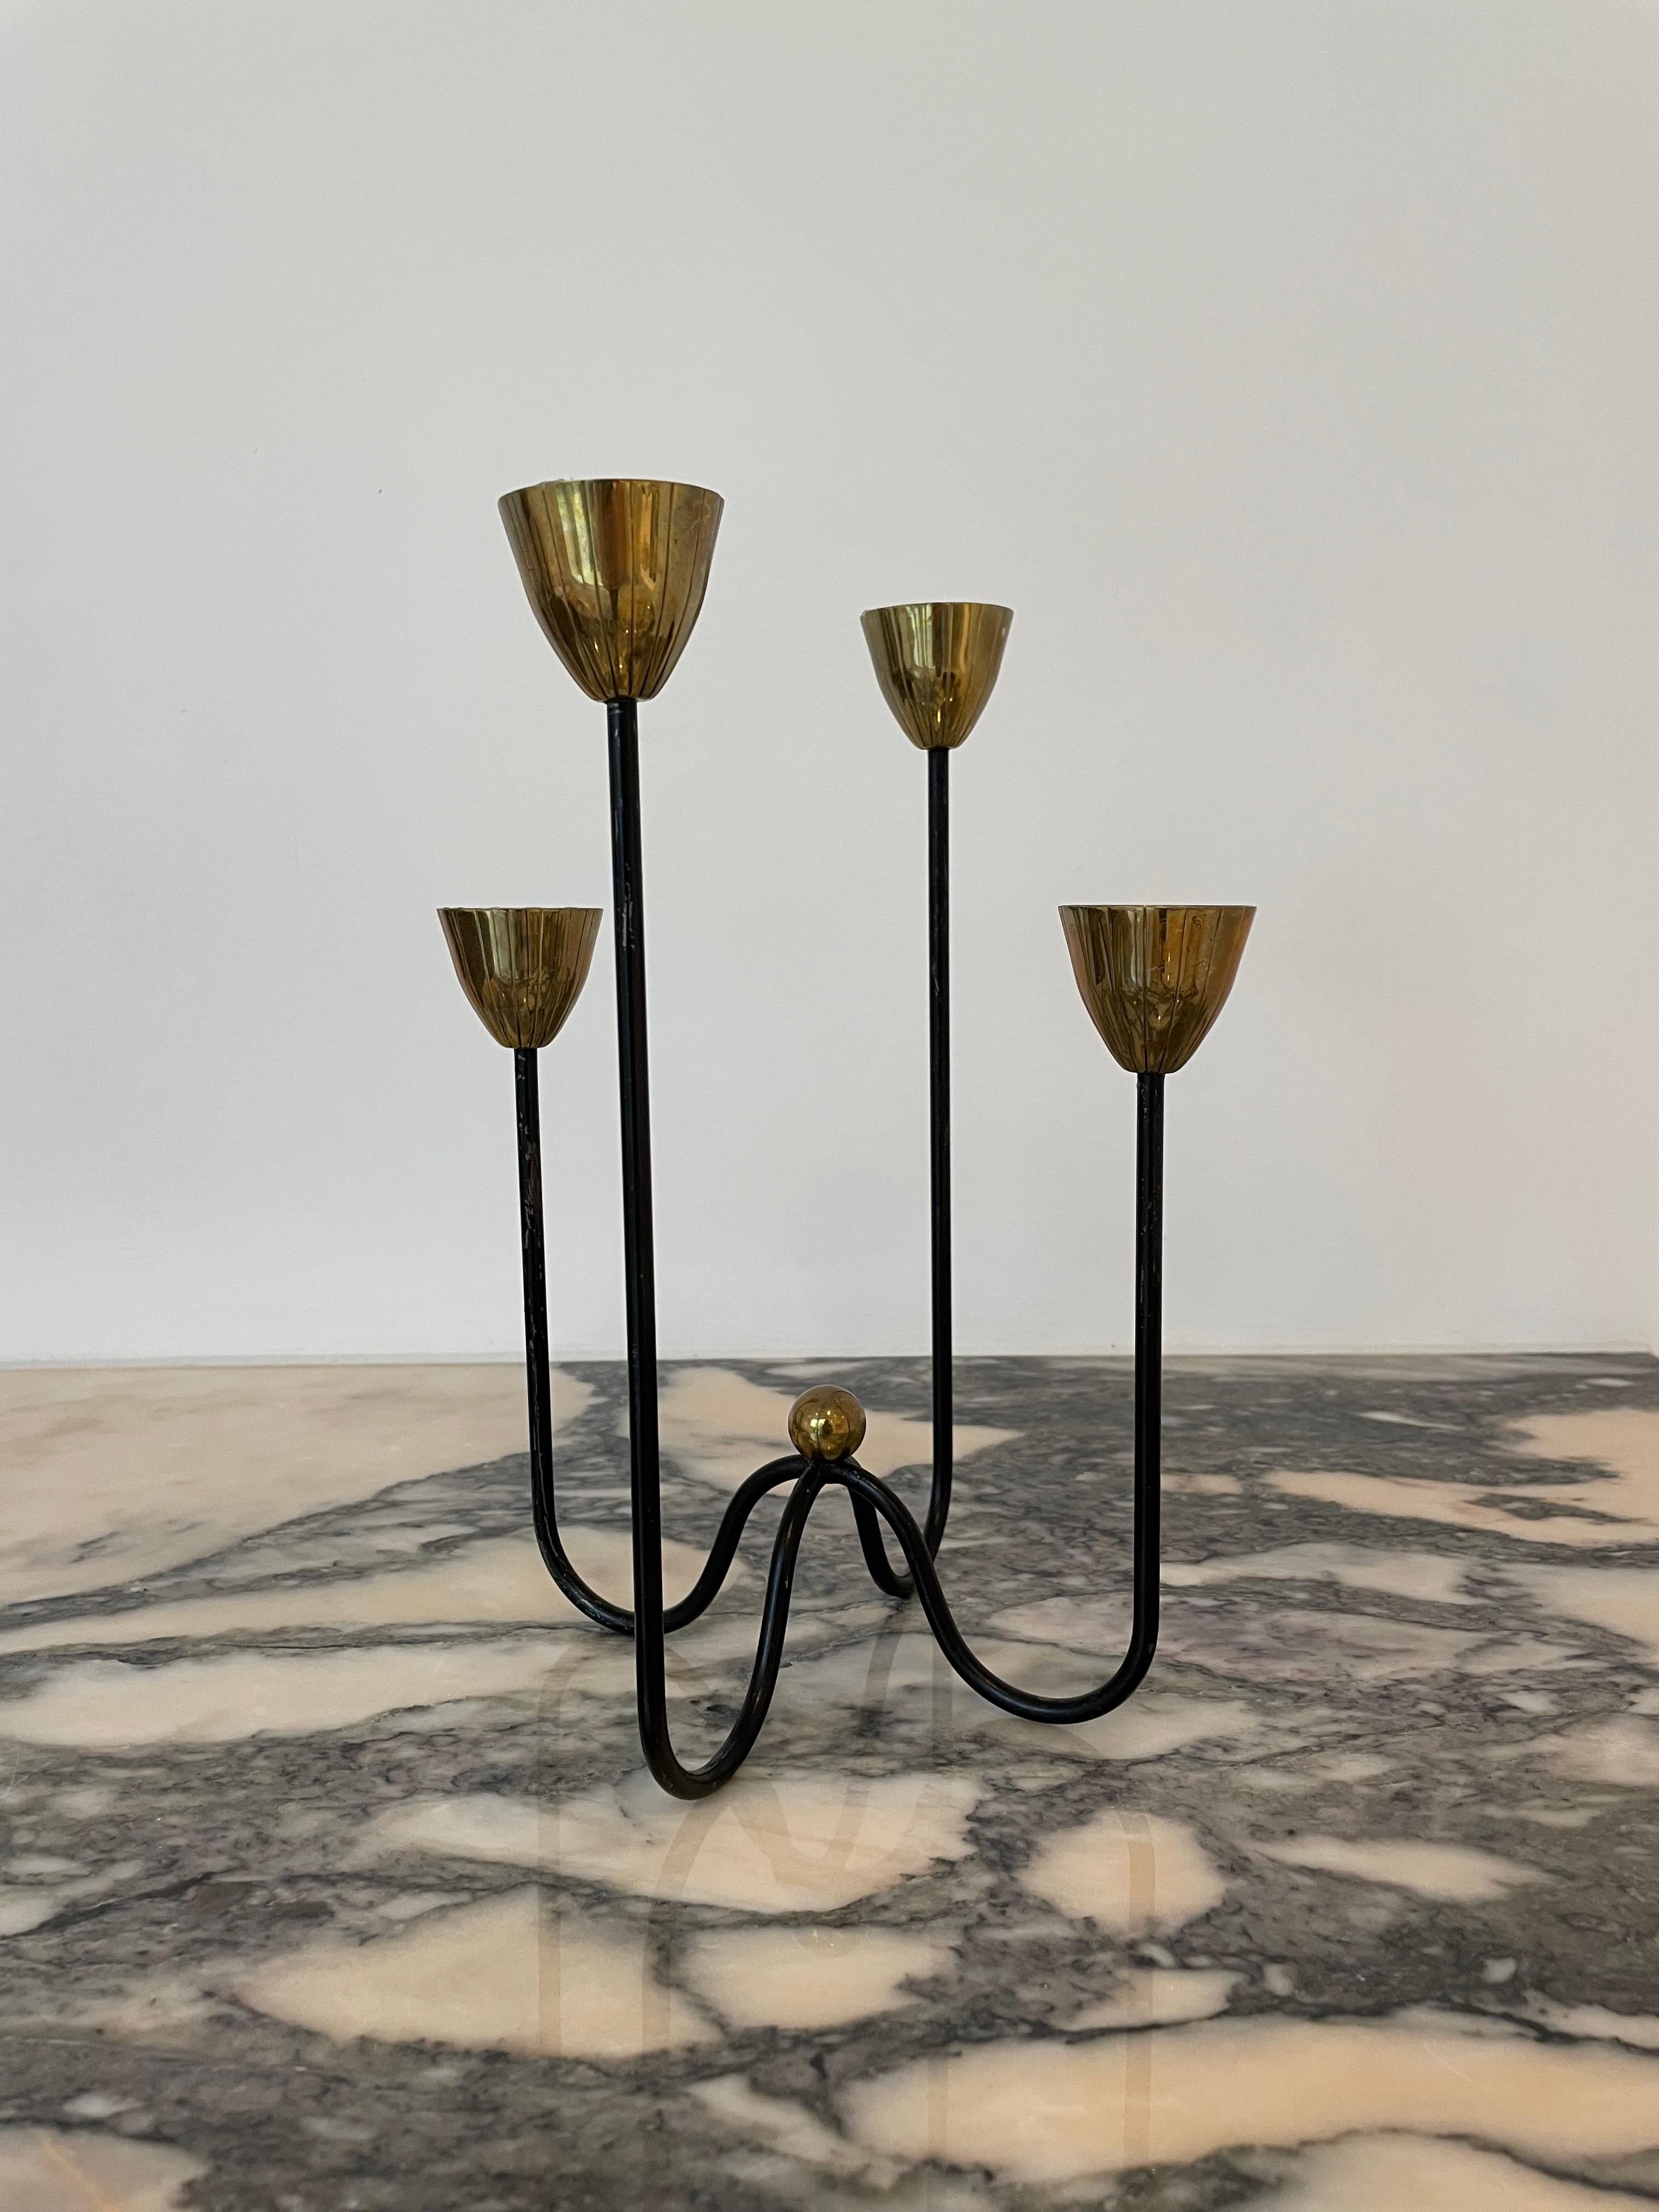 Made from Brass in Sweden in the 1950s. These candlesticks not only serve as functional candle holders but also make an elegant and decorative statement in any room or table setting. The Gunnar Ander Candlesticks reflect the timeless design and